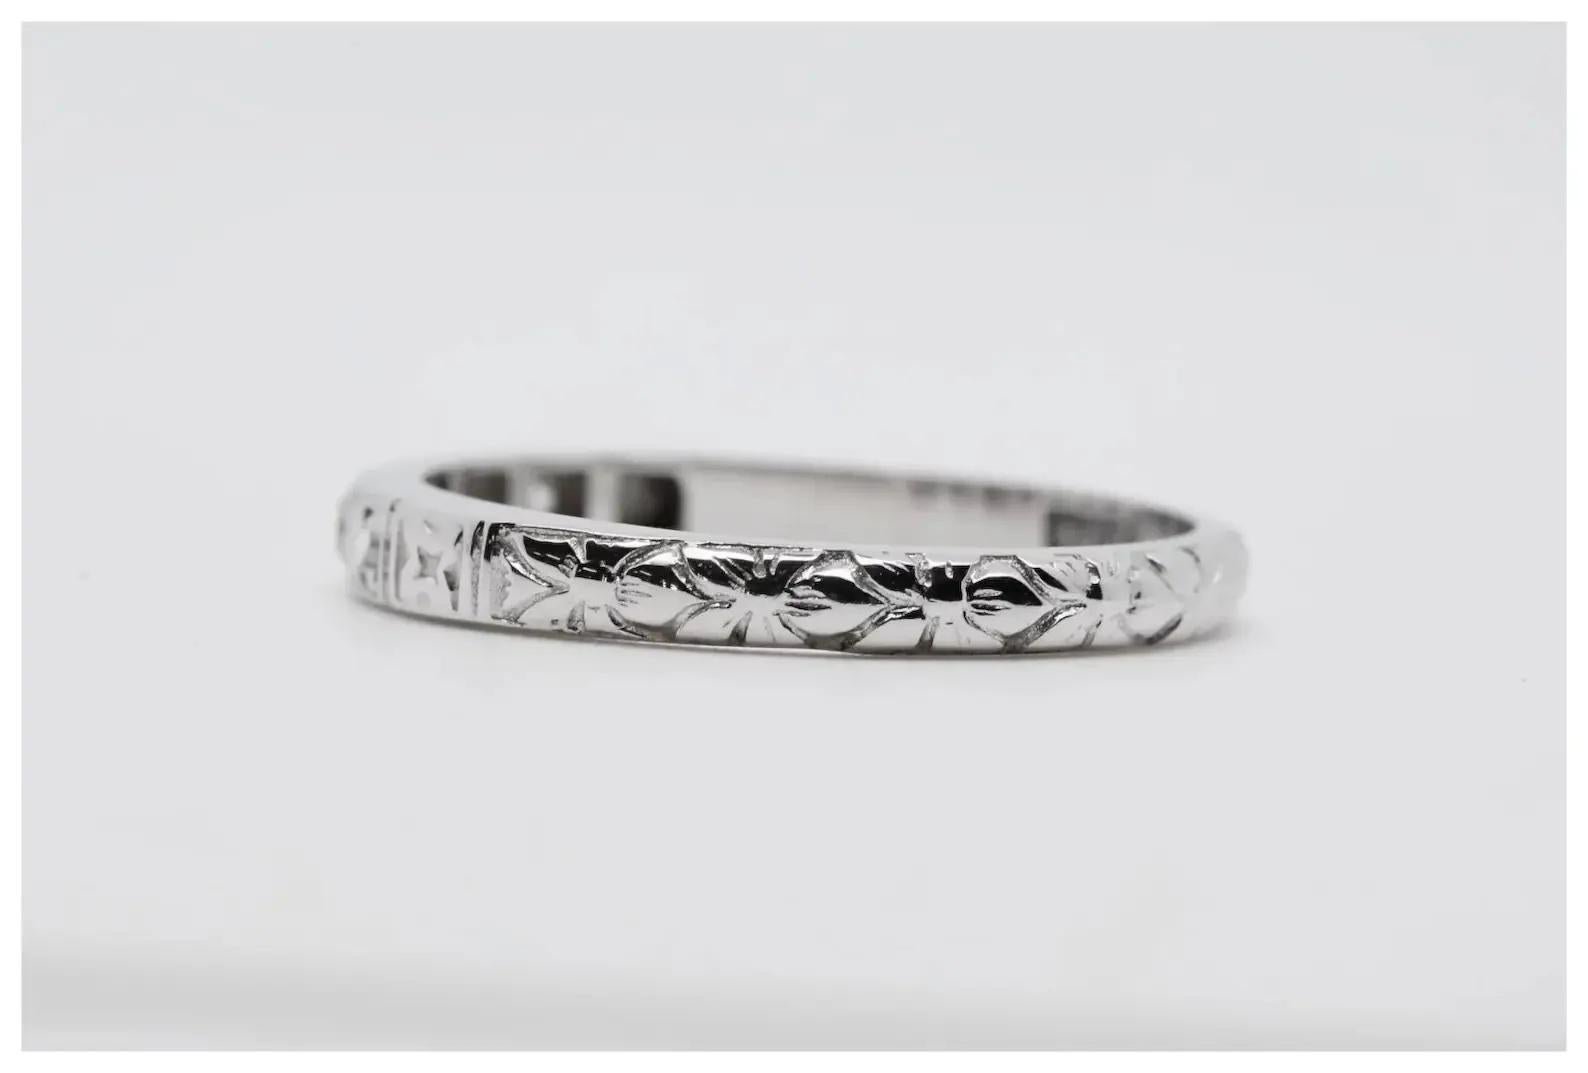 A handmade Art Deco period diamond wedding band in 18 karat white gold. Pave set with 5 round cut diamonds weighing a combined 0.10 carats and grading as H color, VS2 clarity. The band features hand engraved orange blossom flowers throughout in a